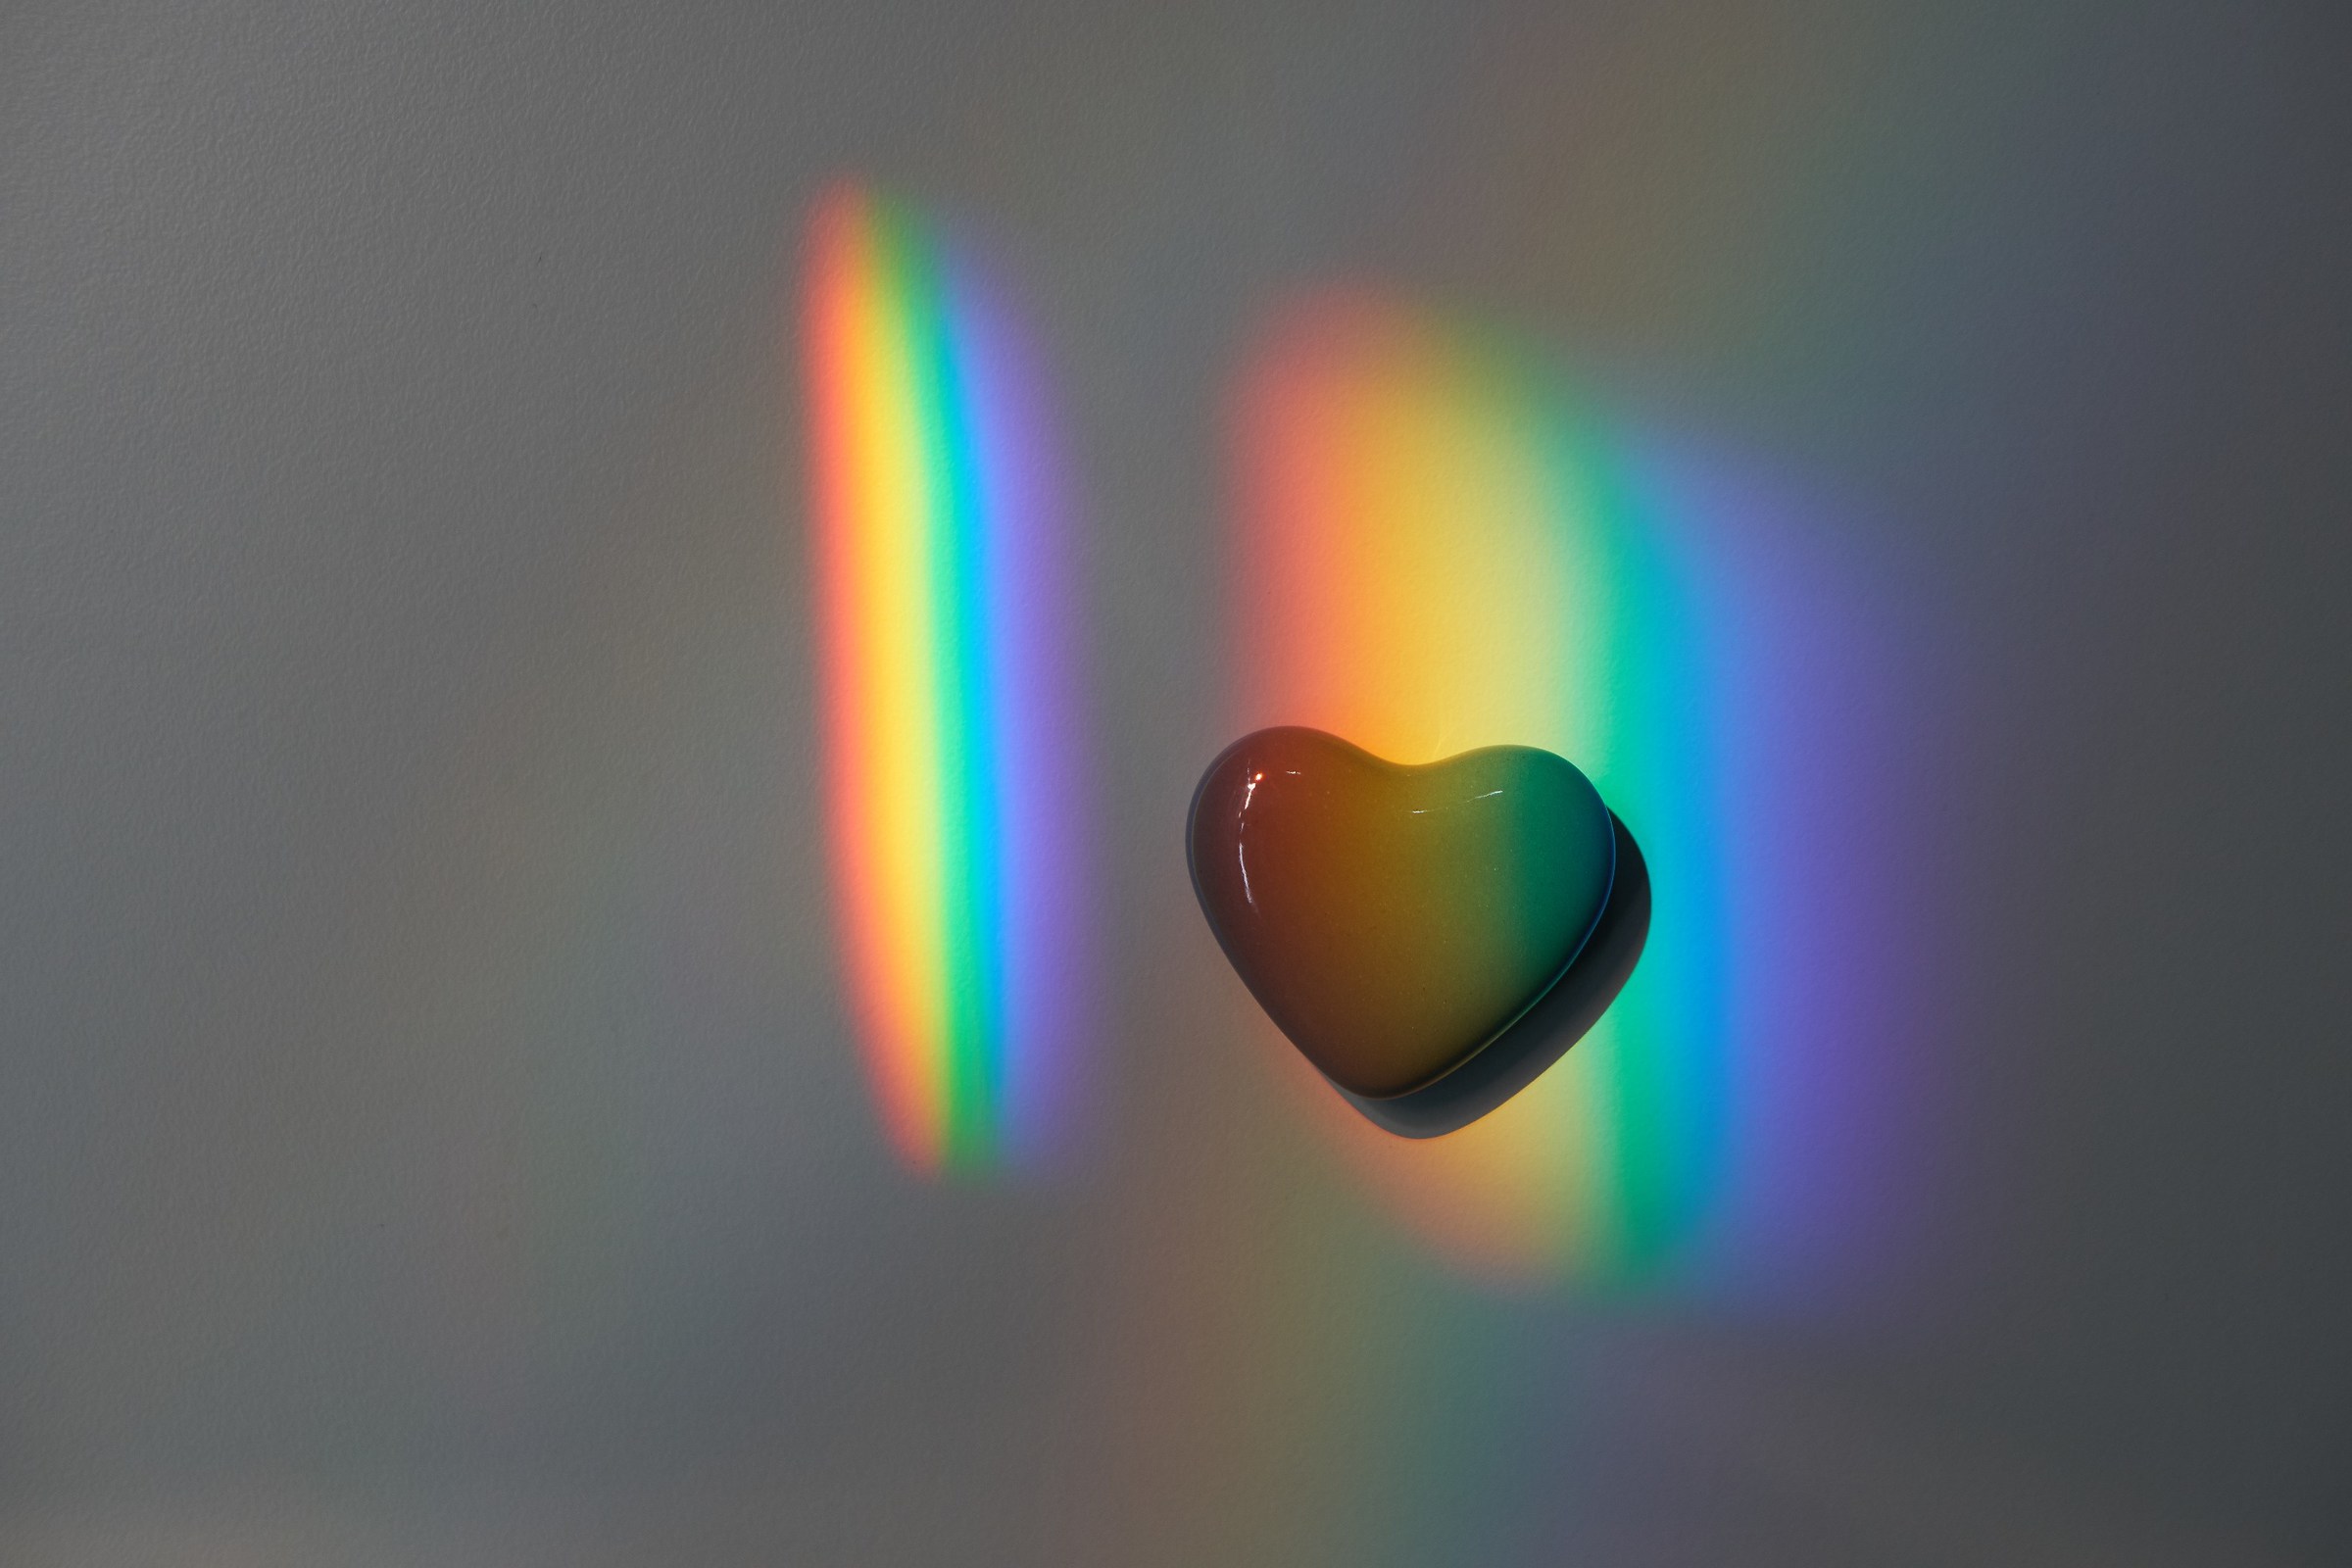 The rainbow in the heart...